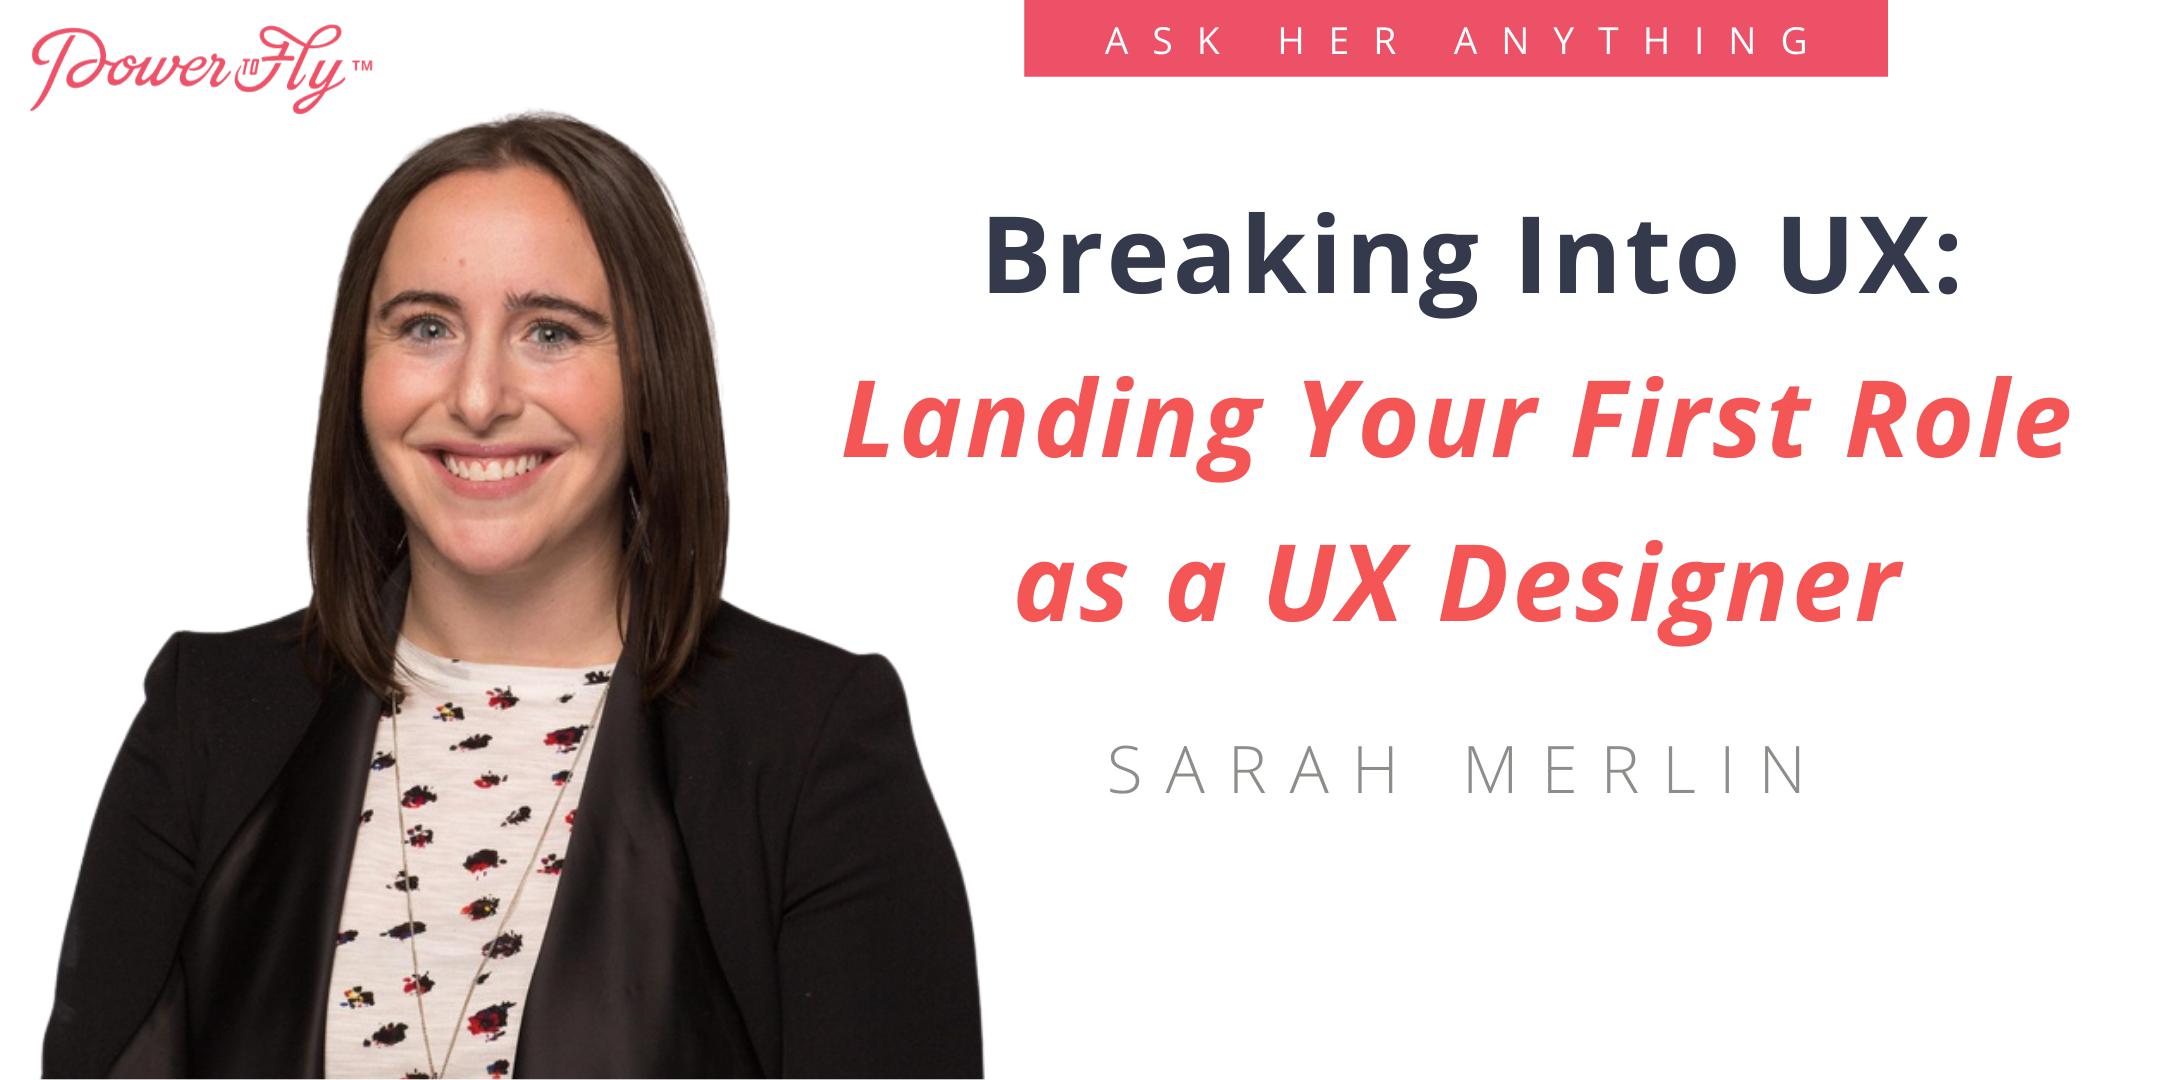 Breaking Into UX: Landing Your First Role as a UX Designer